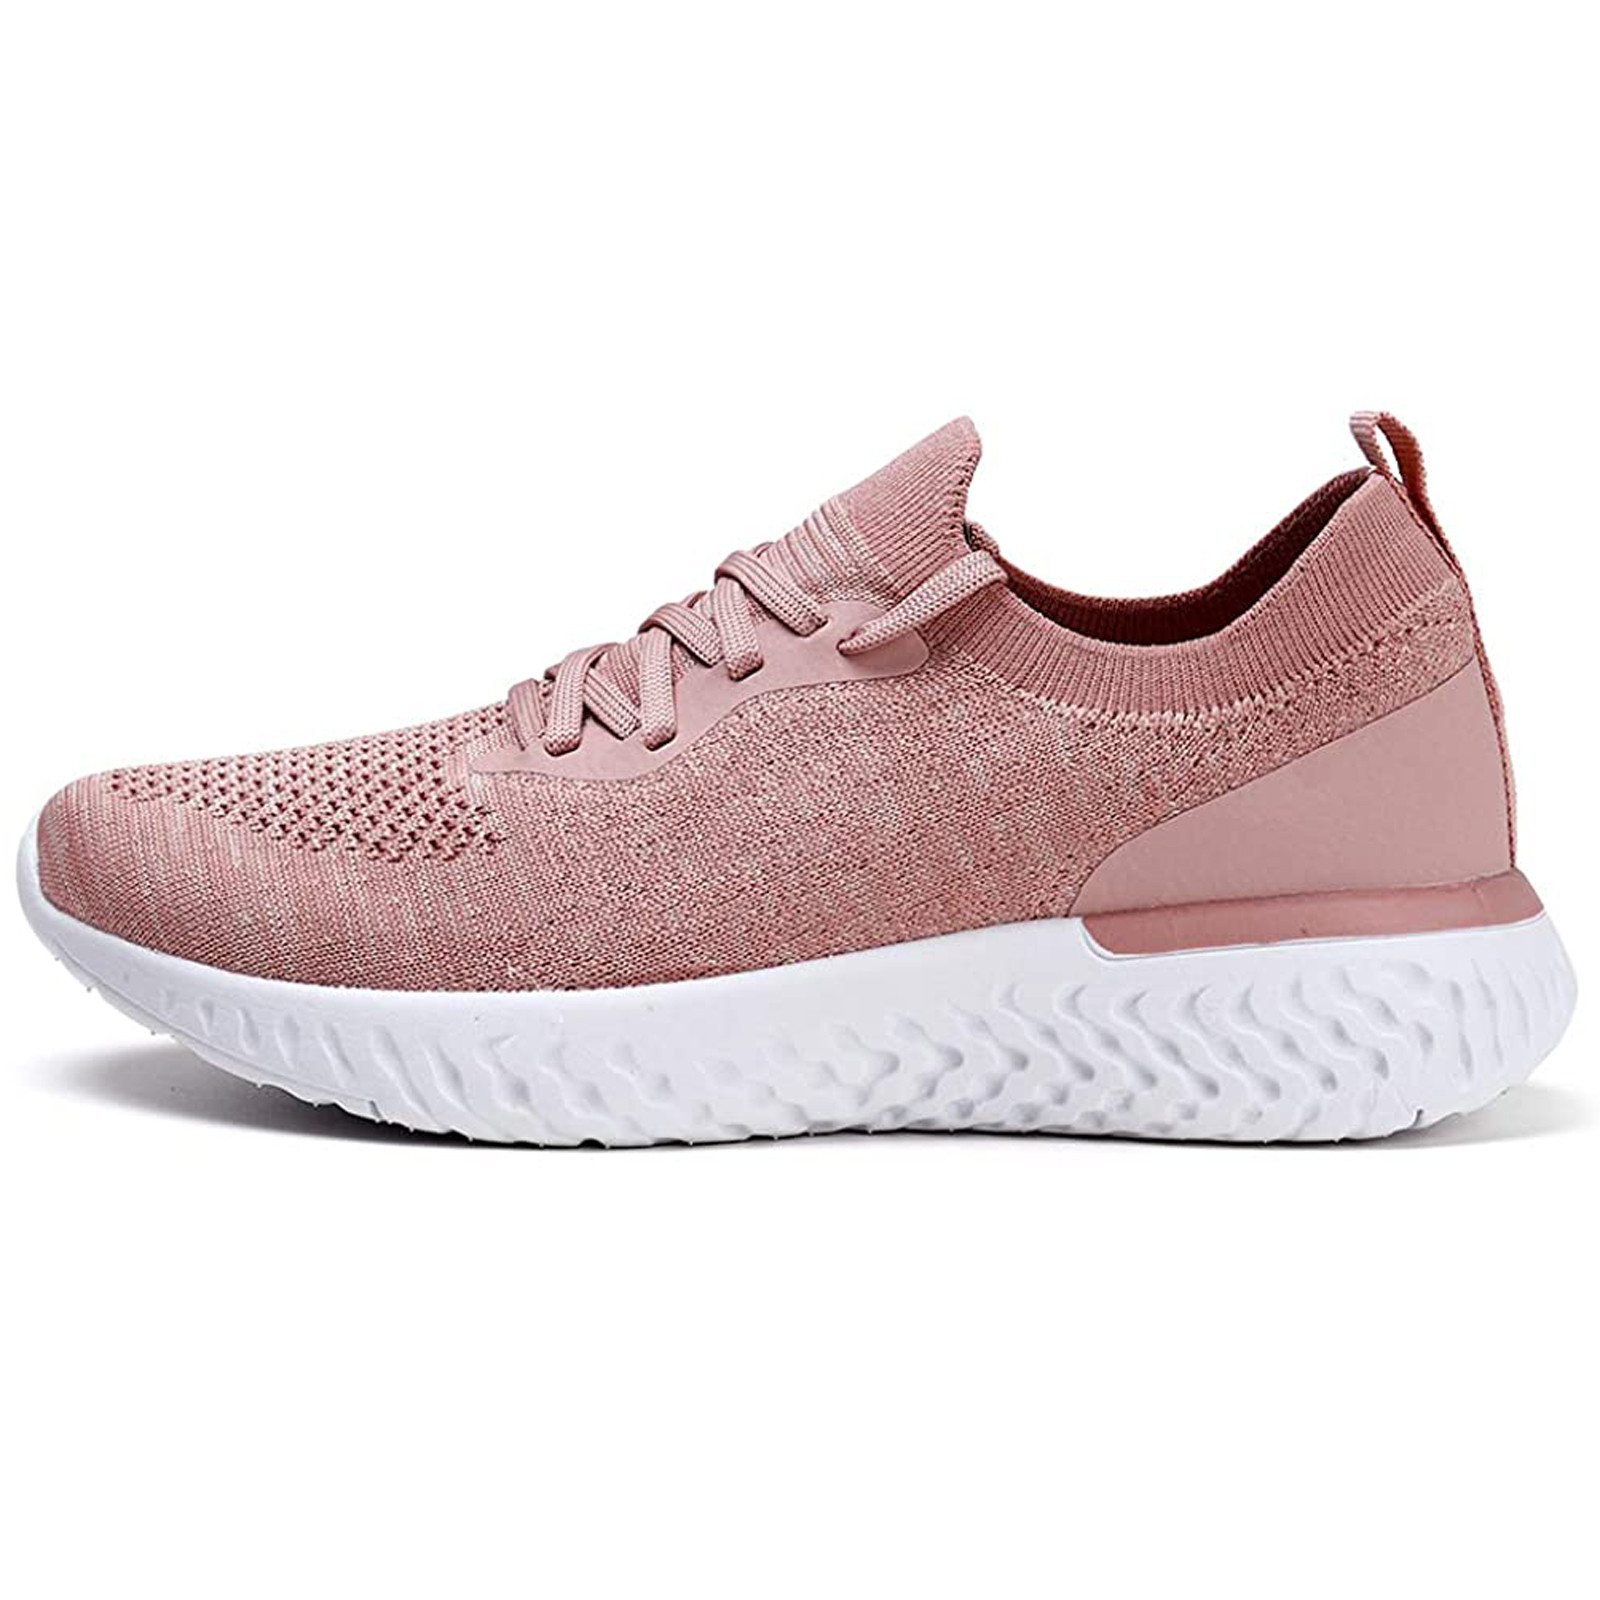 Women’s Sports Shoes Breathable Slip-on Sports Shoes Cushioning Foam Sports Shoes Massage Feeling Women’s Running Shoes alx